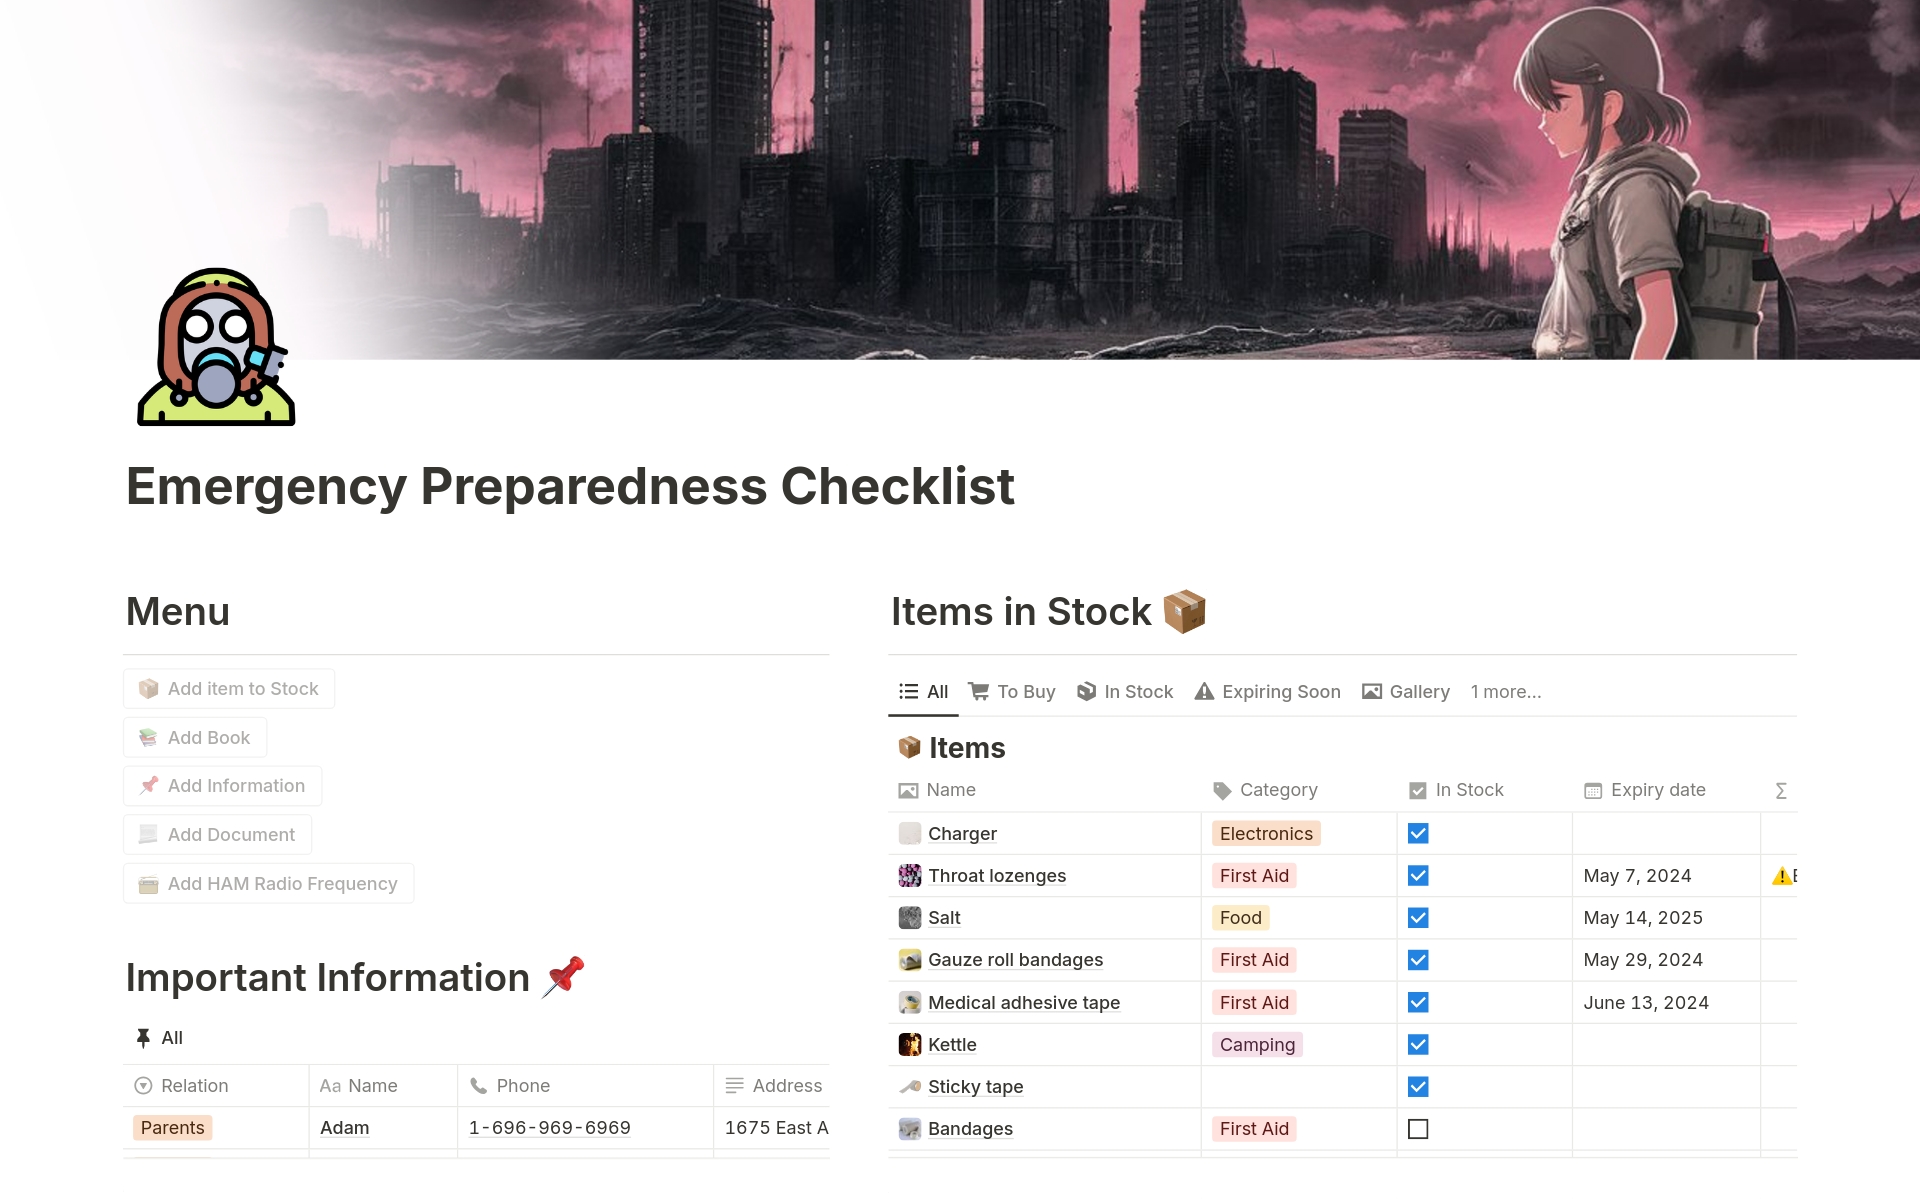 Prepare for any emergency scenario with this comprehensive checklist that helps to complete your pantry with food, water, medical supplies, camping gear, electronics, documents, and other important items.  